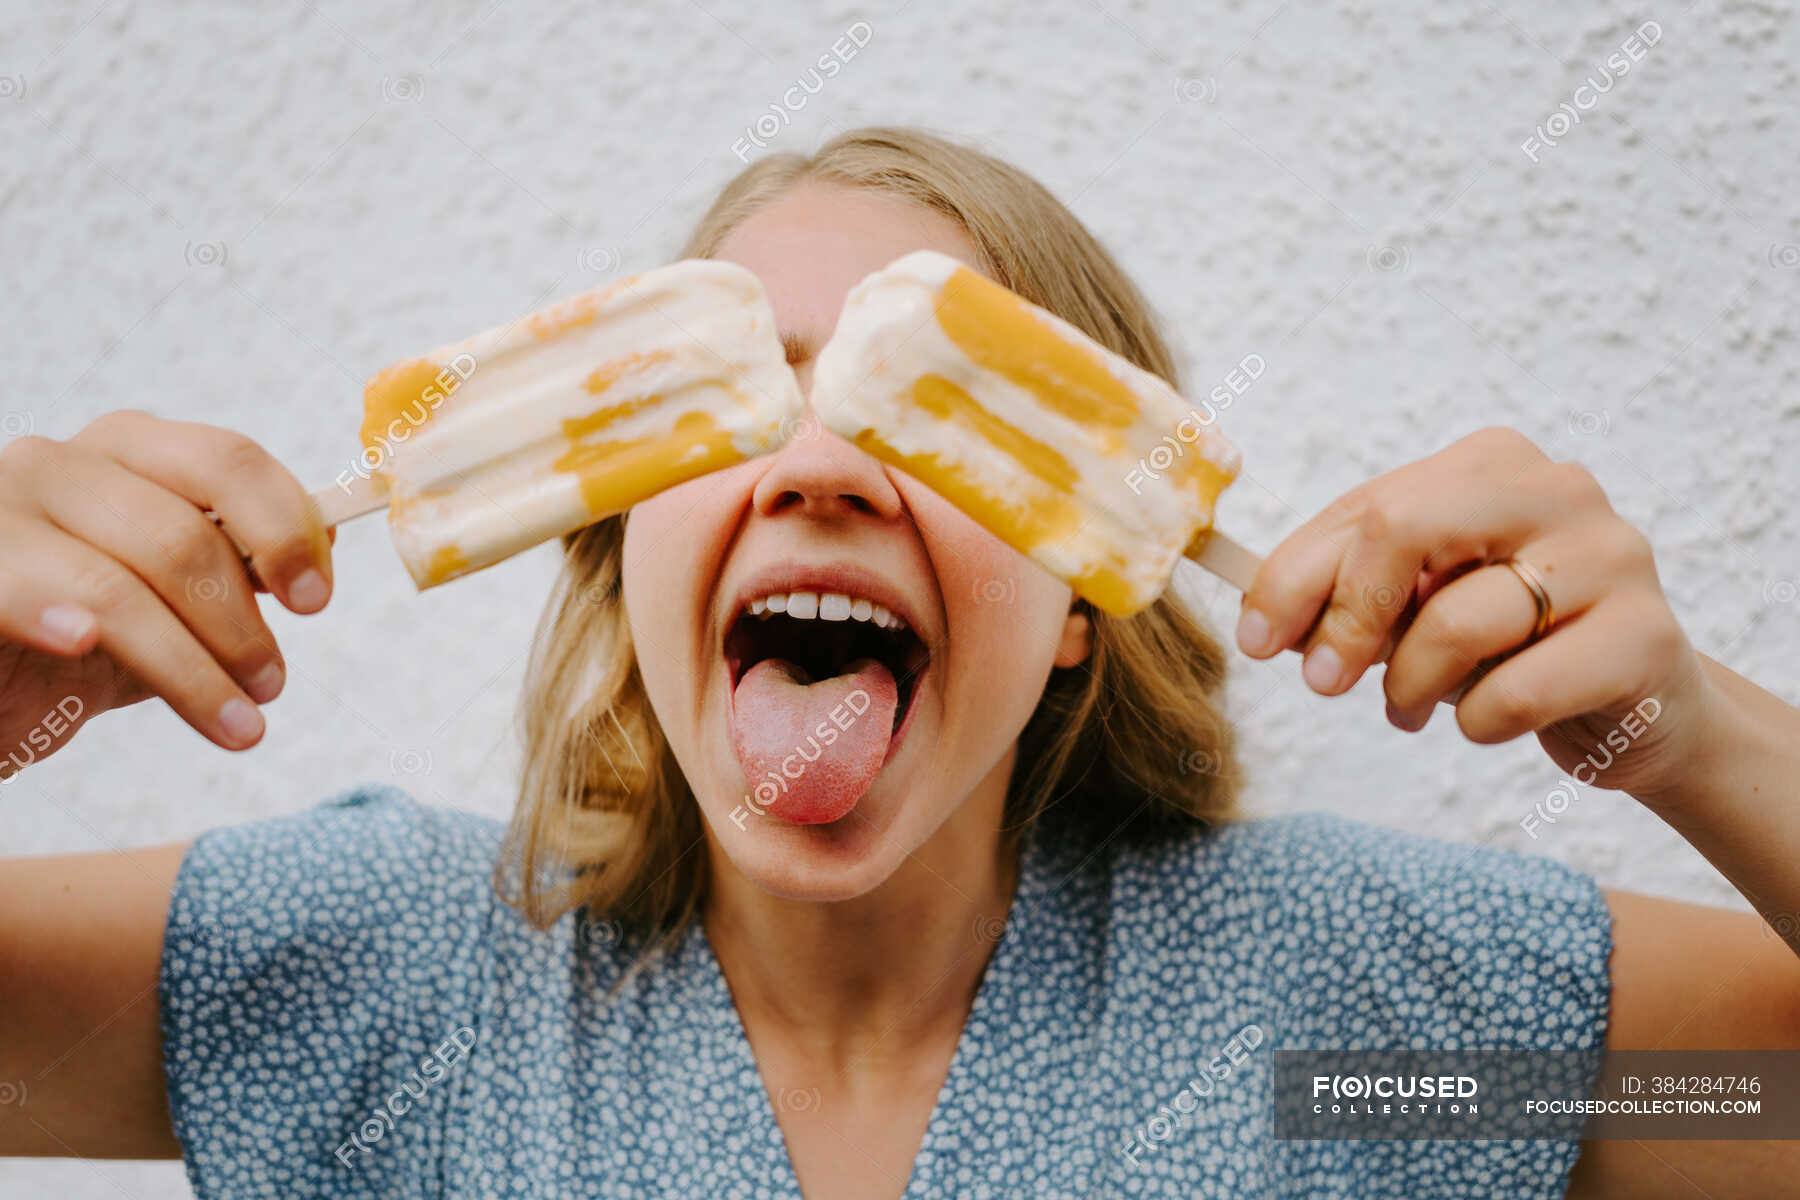 Female Making Funny Grimace With Tongue Out And Covering Eyes With Tasty Ice Lollies On Sticks 5063